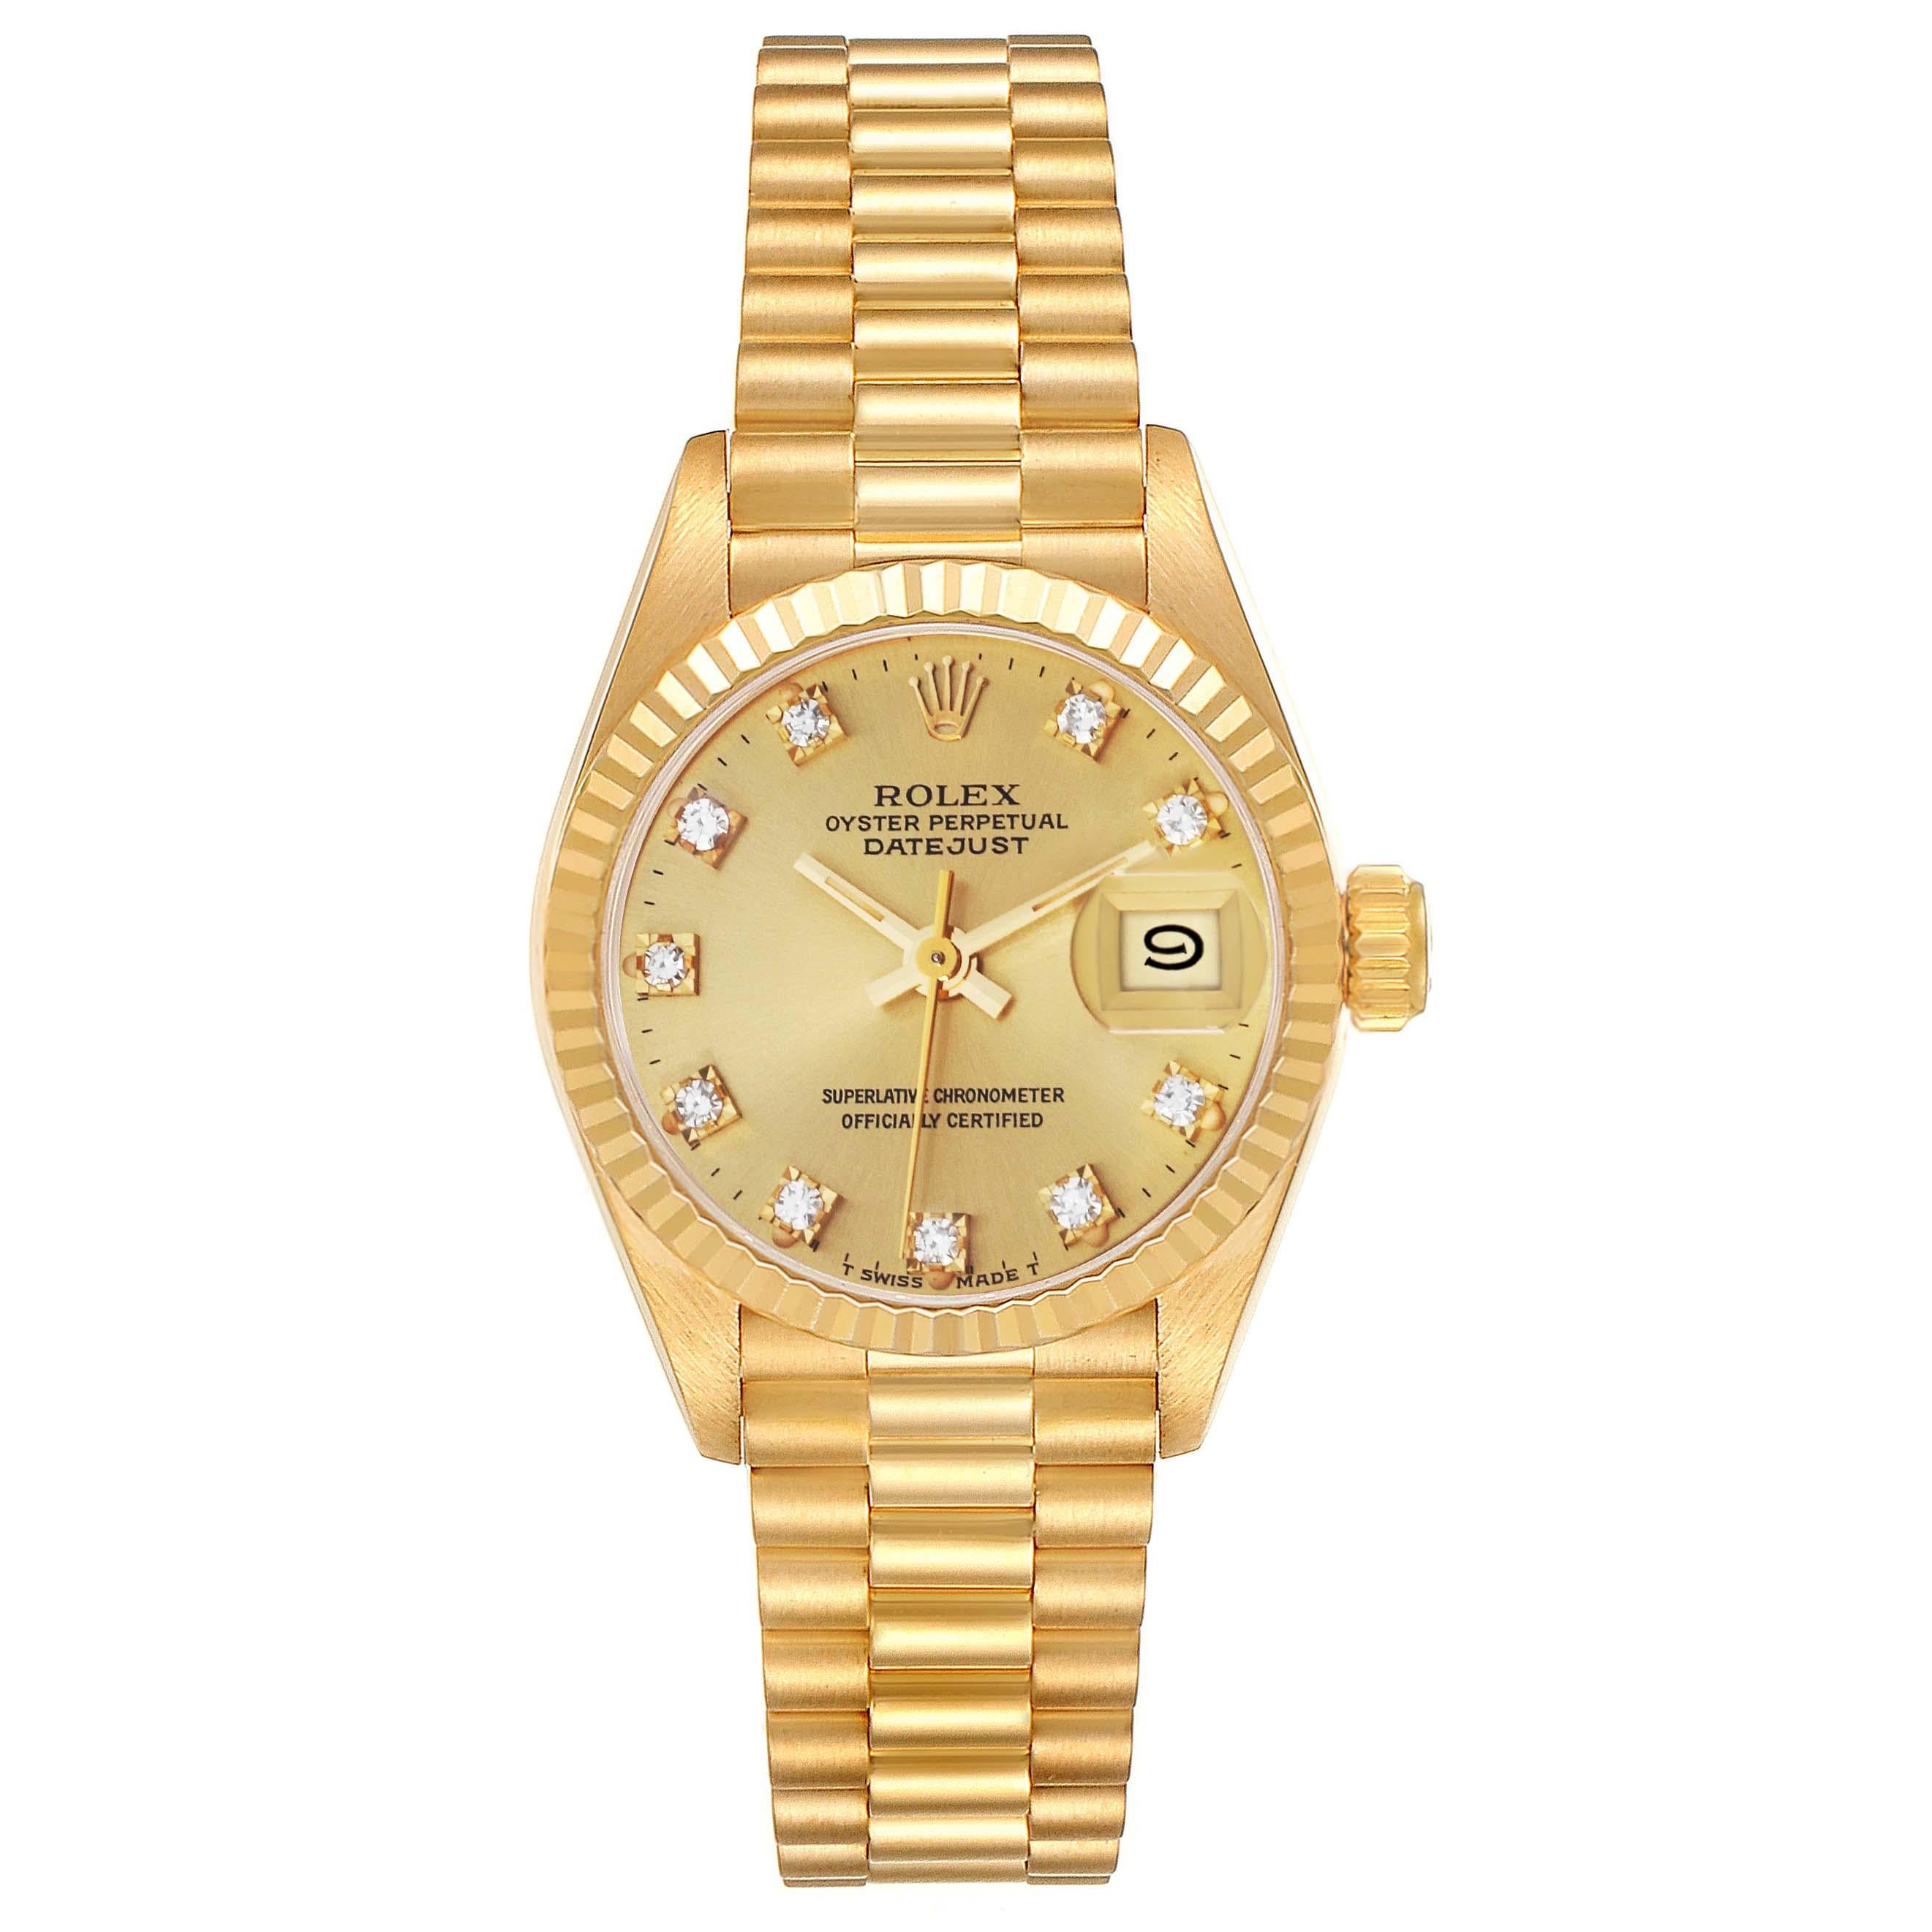 Rolex President Yellow Gold Diamond Dial Ladies Watch 69178. Officially certified chronometer automatic self-winding movement. 18k yellow gold oyster case 26.0 mm in diameter. Rolex logo on the crown. 18k yellow gold fluted bezel. Scratch resistant